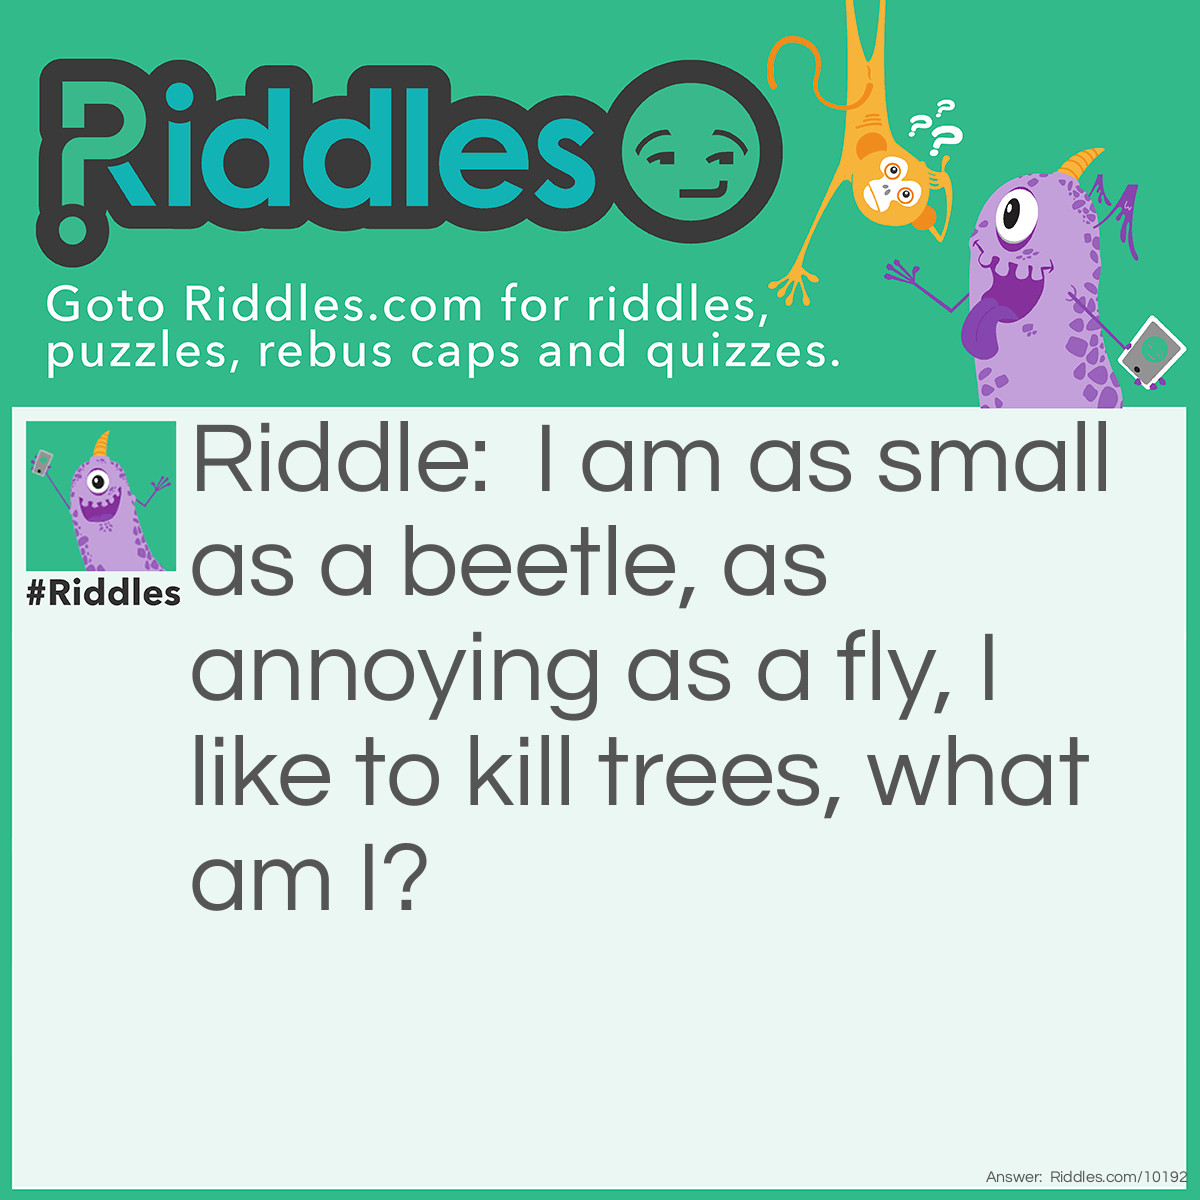 Riddle: I am as small as a beetle, as annoying as a fly, I like to kill trees, what am I? Answer: A Lantern Fly! (Also stop stealing my riddles, Berries, the LearnyVerse Wizard from Pyranic)